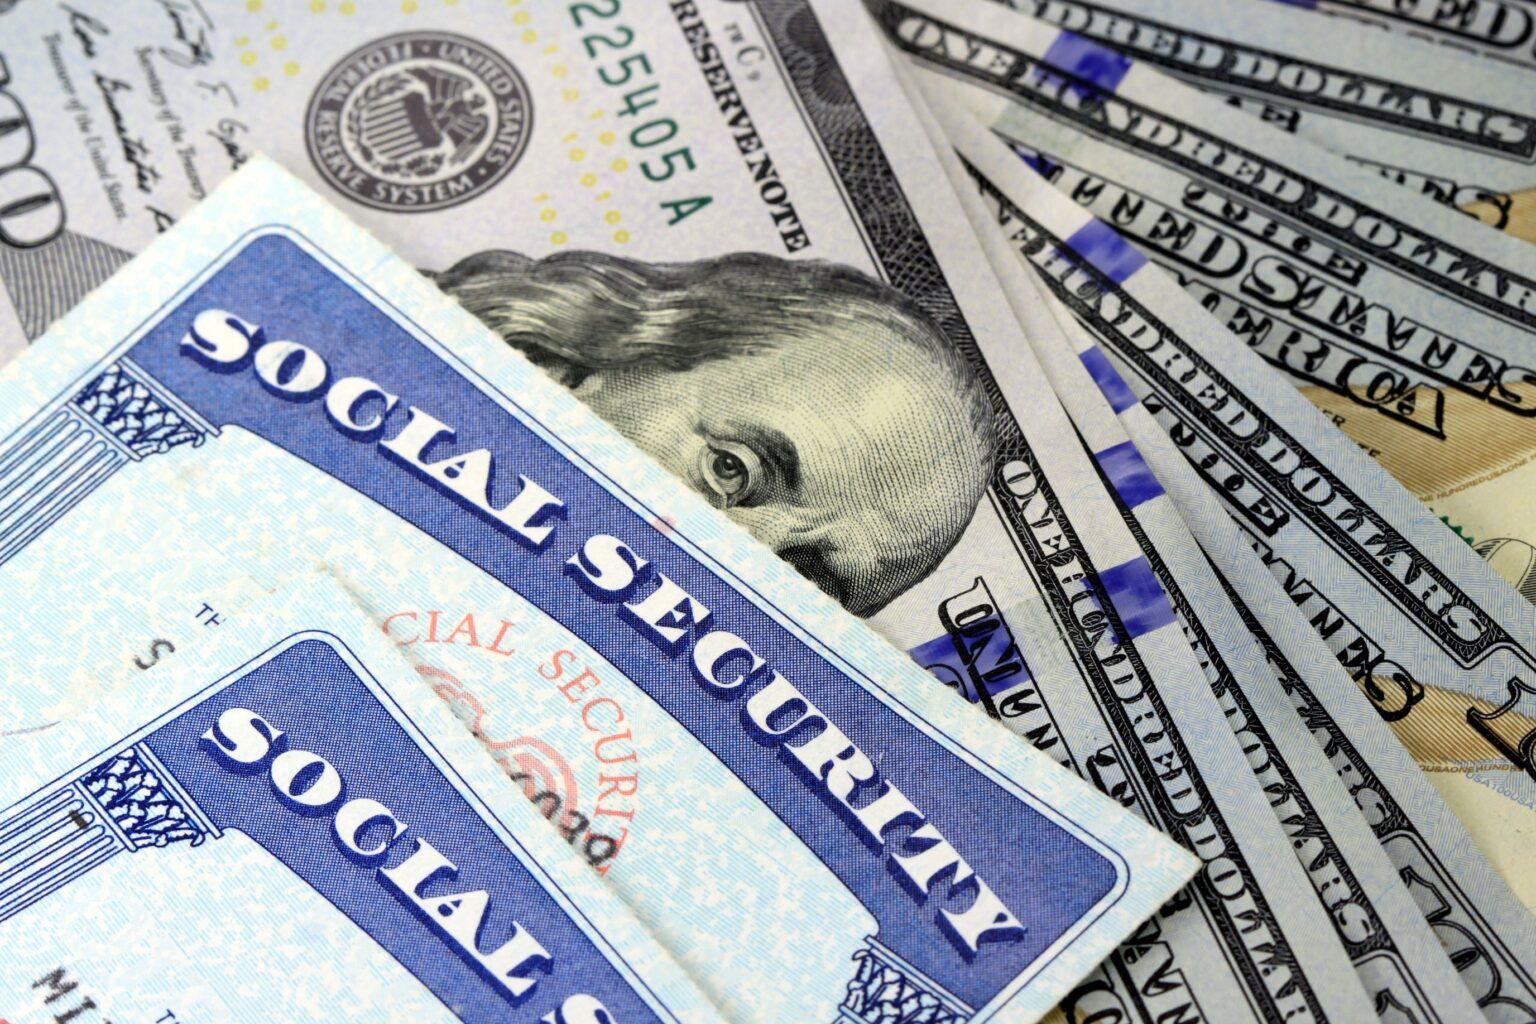 Can You Count on Social Security When You Retire